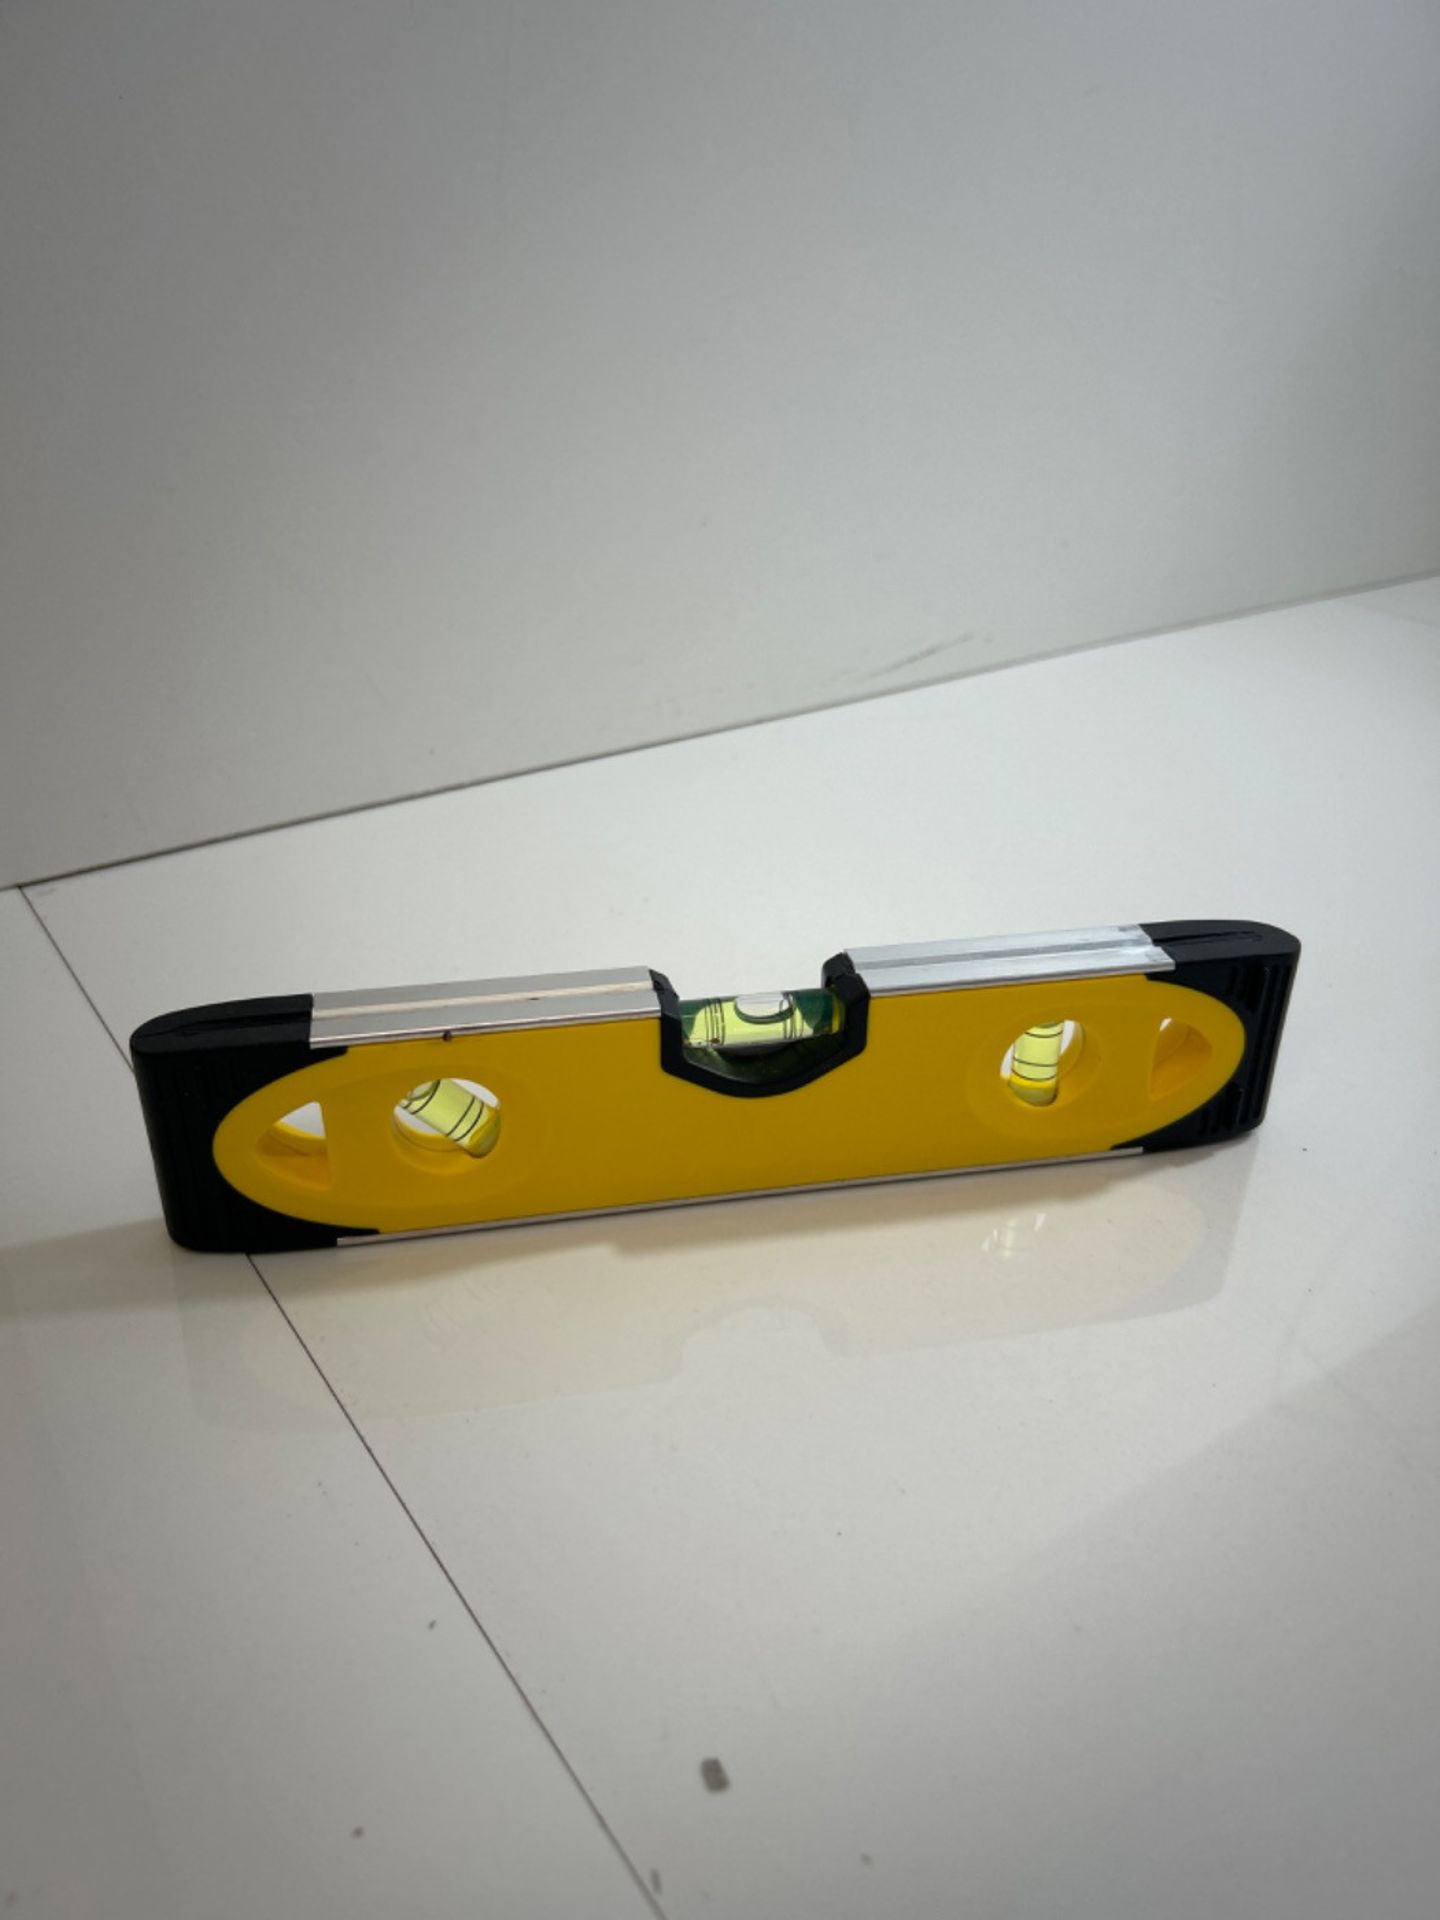 Stanley Shock Proof Torpedo Level 230 mm/9 Inch 0-43-511 - Image 2 of 3